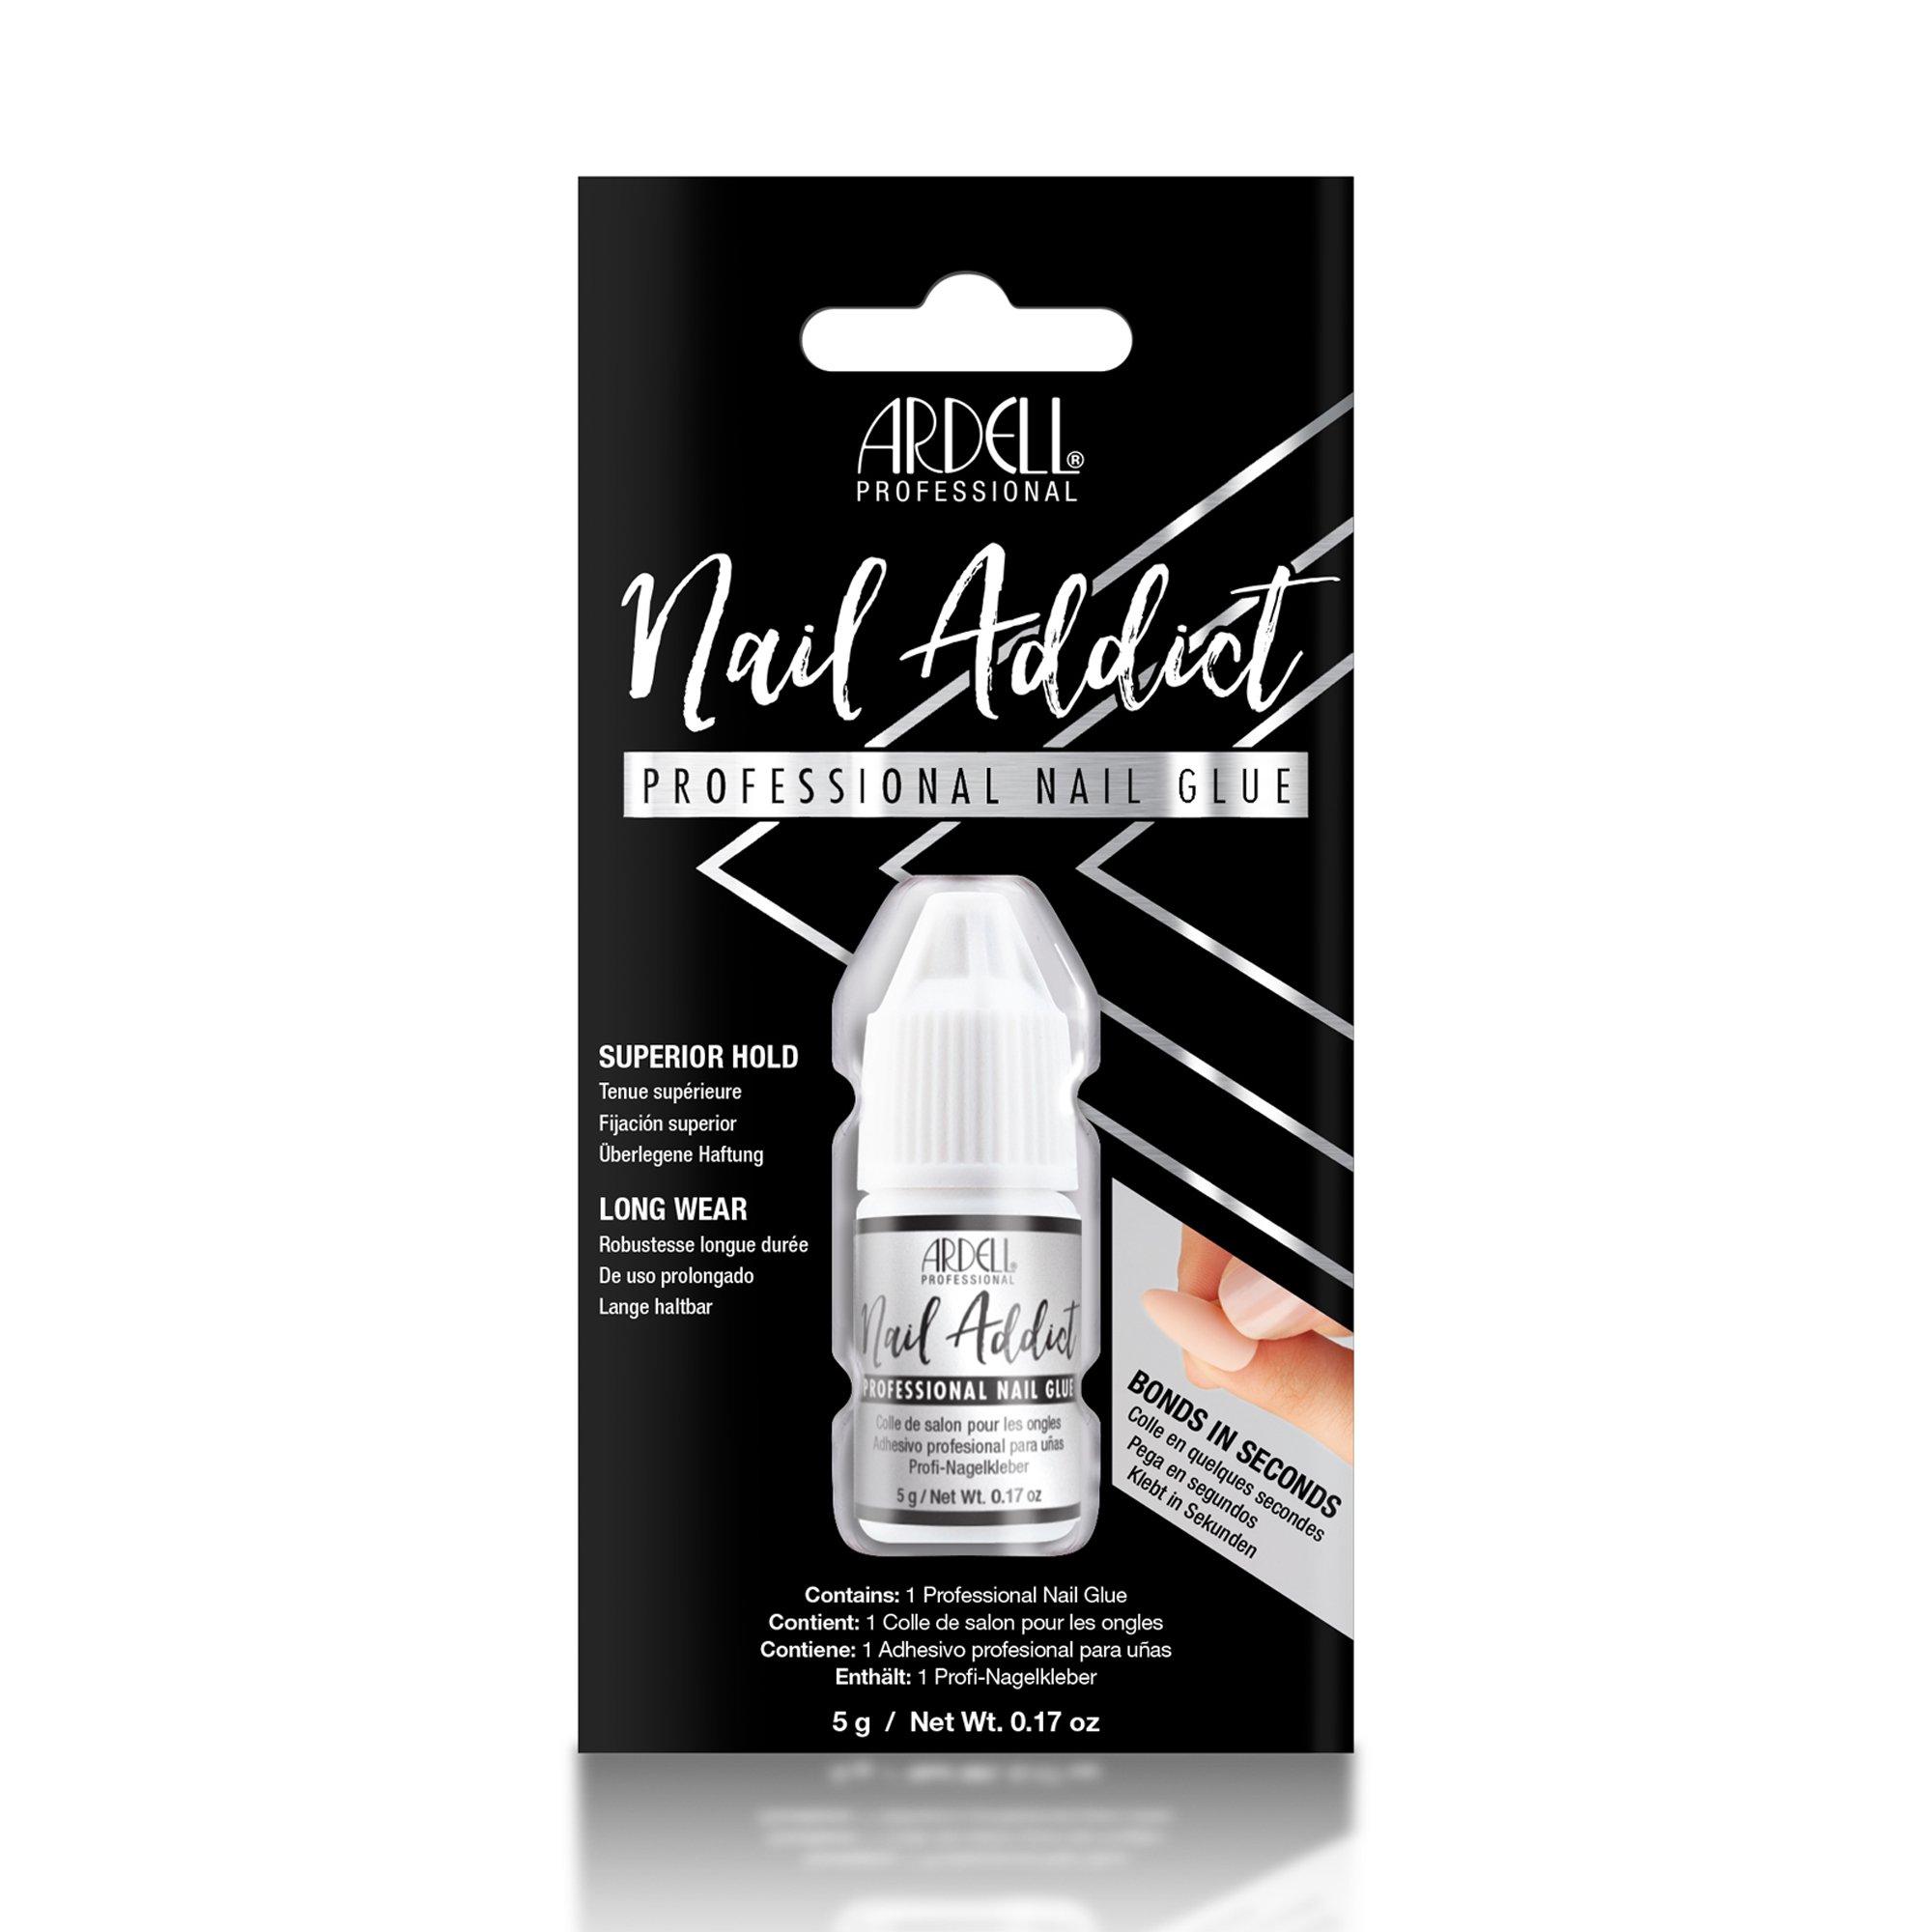 ARDELL Nail Addict Nail Addict Professional Nail Glue, Colle à Ongles 